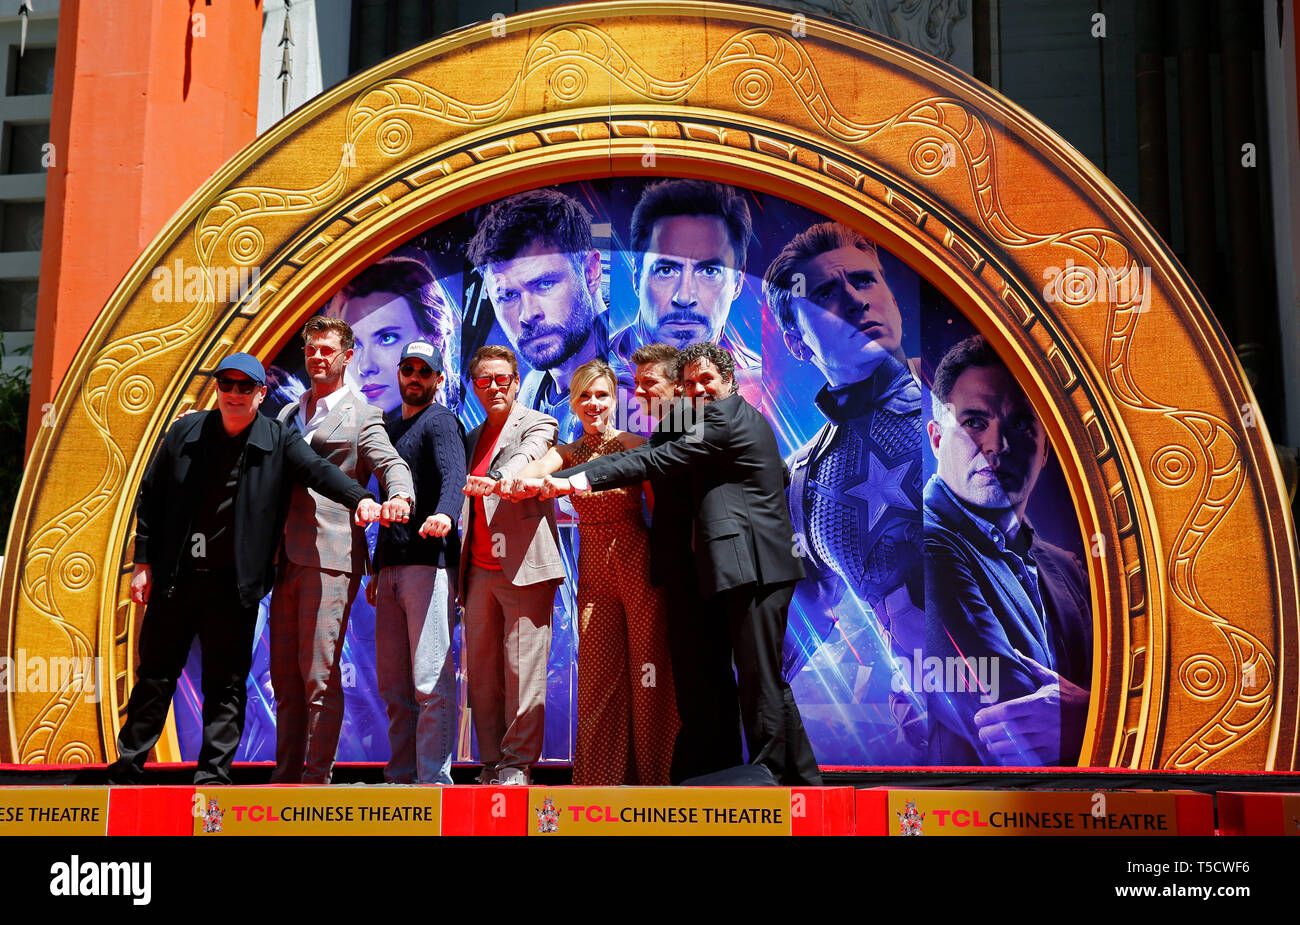 (190424) -- LOS ANGELES, April 24, 2019 (Xinhua) -- Marvels Studios president Kevin Feige, actors Chris Hemsworth, Chris Evans, Robert Downey Jr., actress Scarlett Johansson, actors Jeremy Renner, Mark Ruffalo (From L to R) attend their print ceremony in the forecourt of the TCL Chinese Theater in Los Angeles, the United States, April 23, 2019. The cast of Marvel Studios 'Avengers: Endgame' including Robert Downey Jr., Chris Evans, Mark Ruffalo, Chris Hemsworth, Scarlett Johansson, and Jeremy Renner, along with Marvel Studios President Kevin Feige, received one of Hollywood's oldest accolades Stock Photo